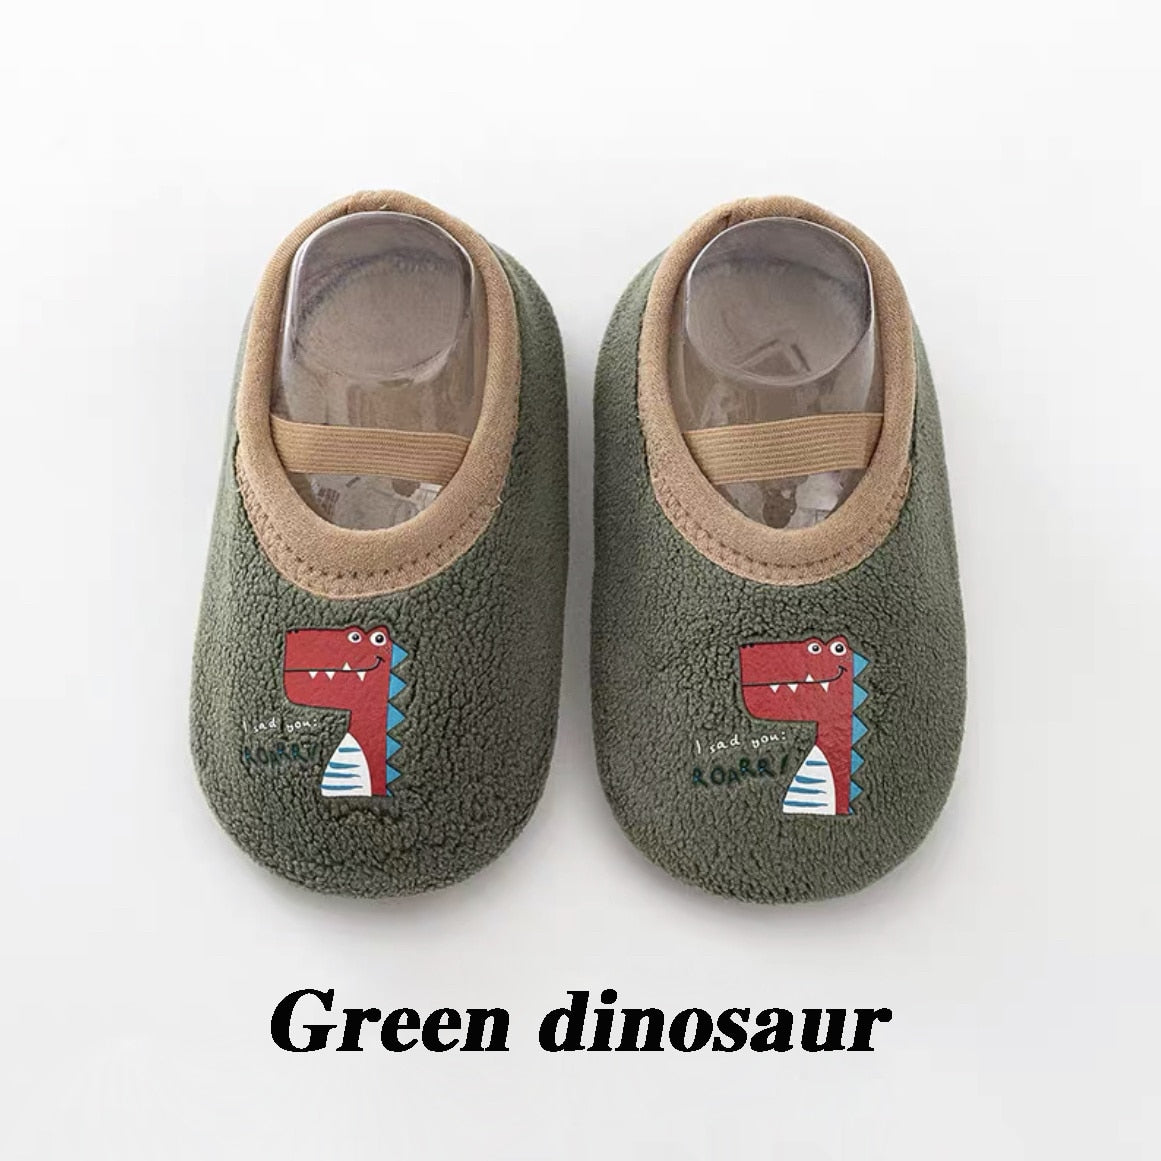 Baby Anti-slip Socks Newborn Warm Crib Floor Shoes with Rubber Sole for Children Boy Toddler Foot Girl Infant Cute Kids Slippers